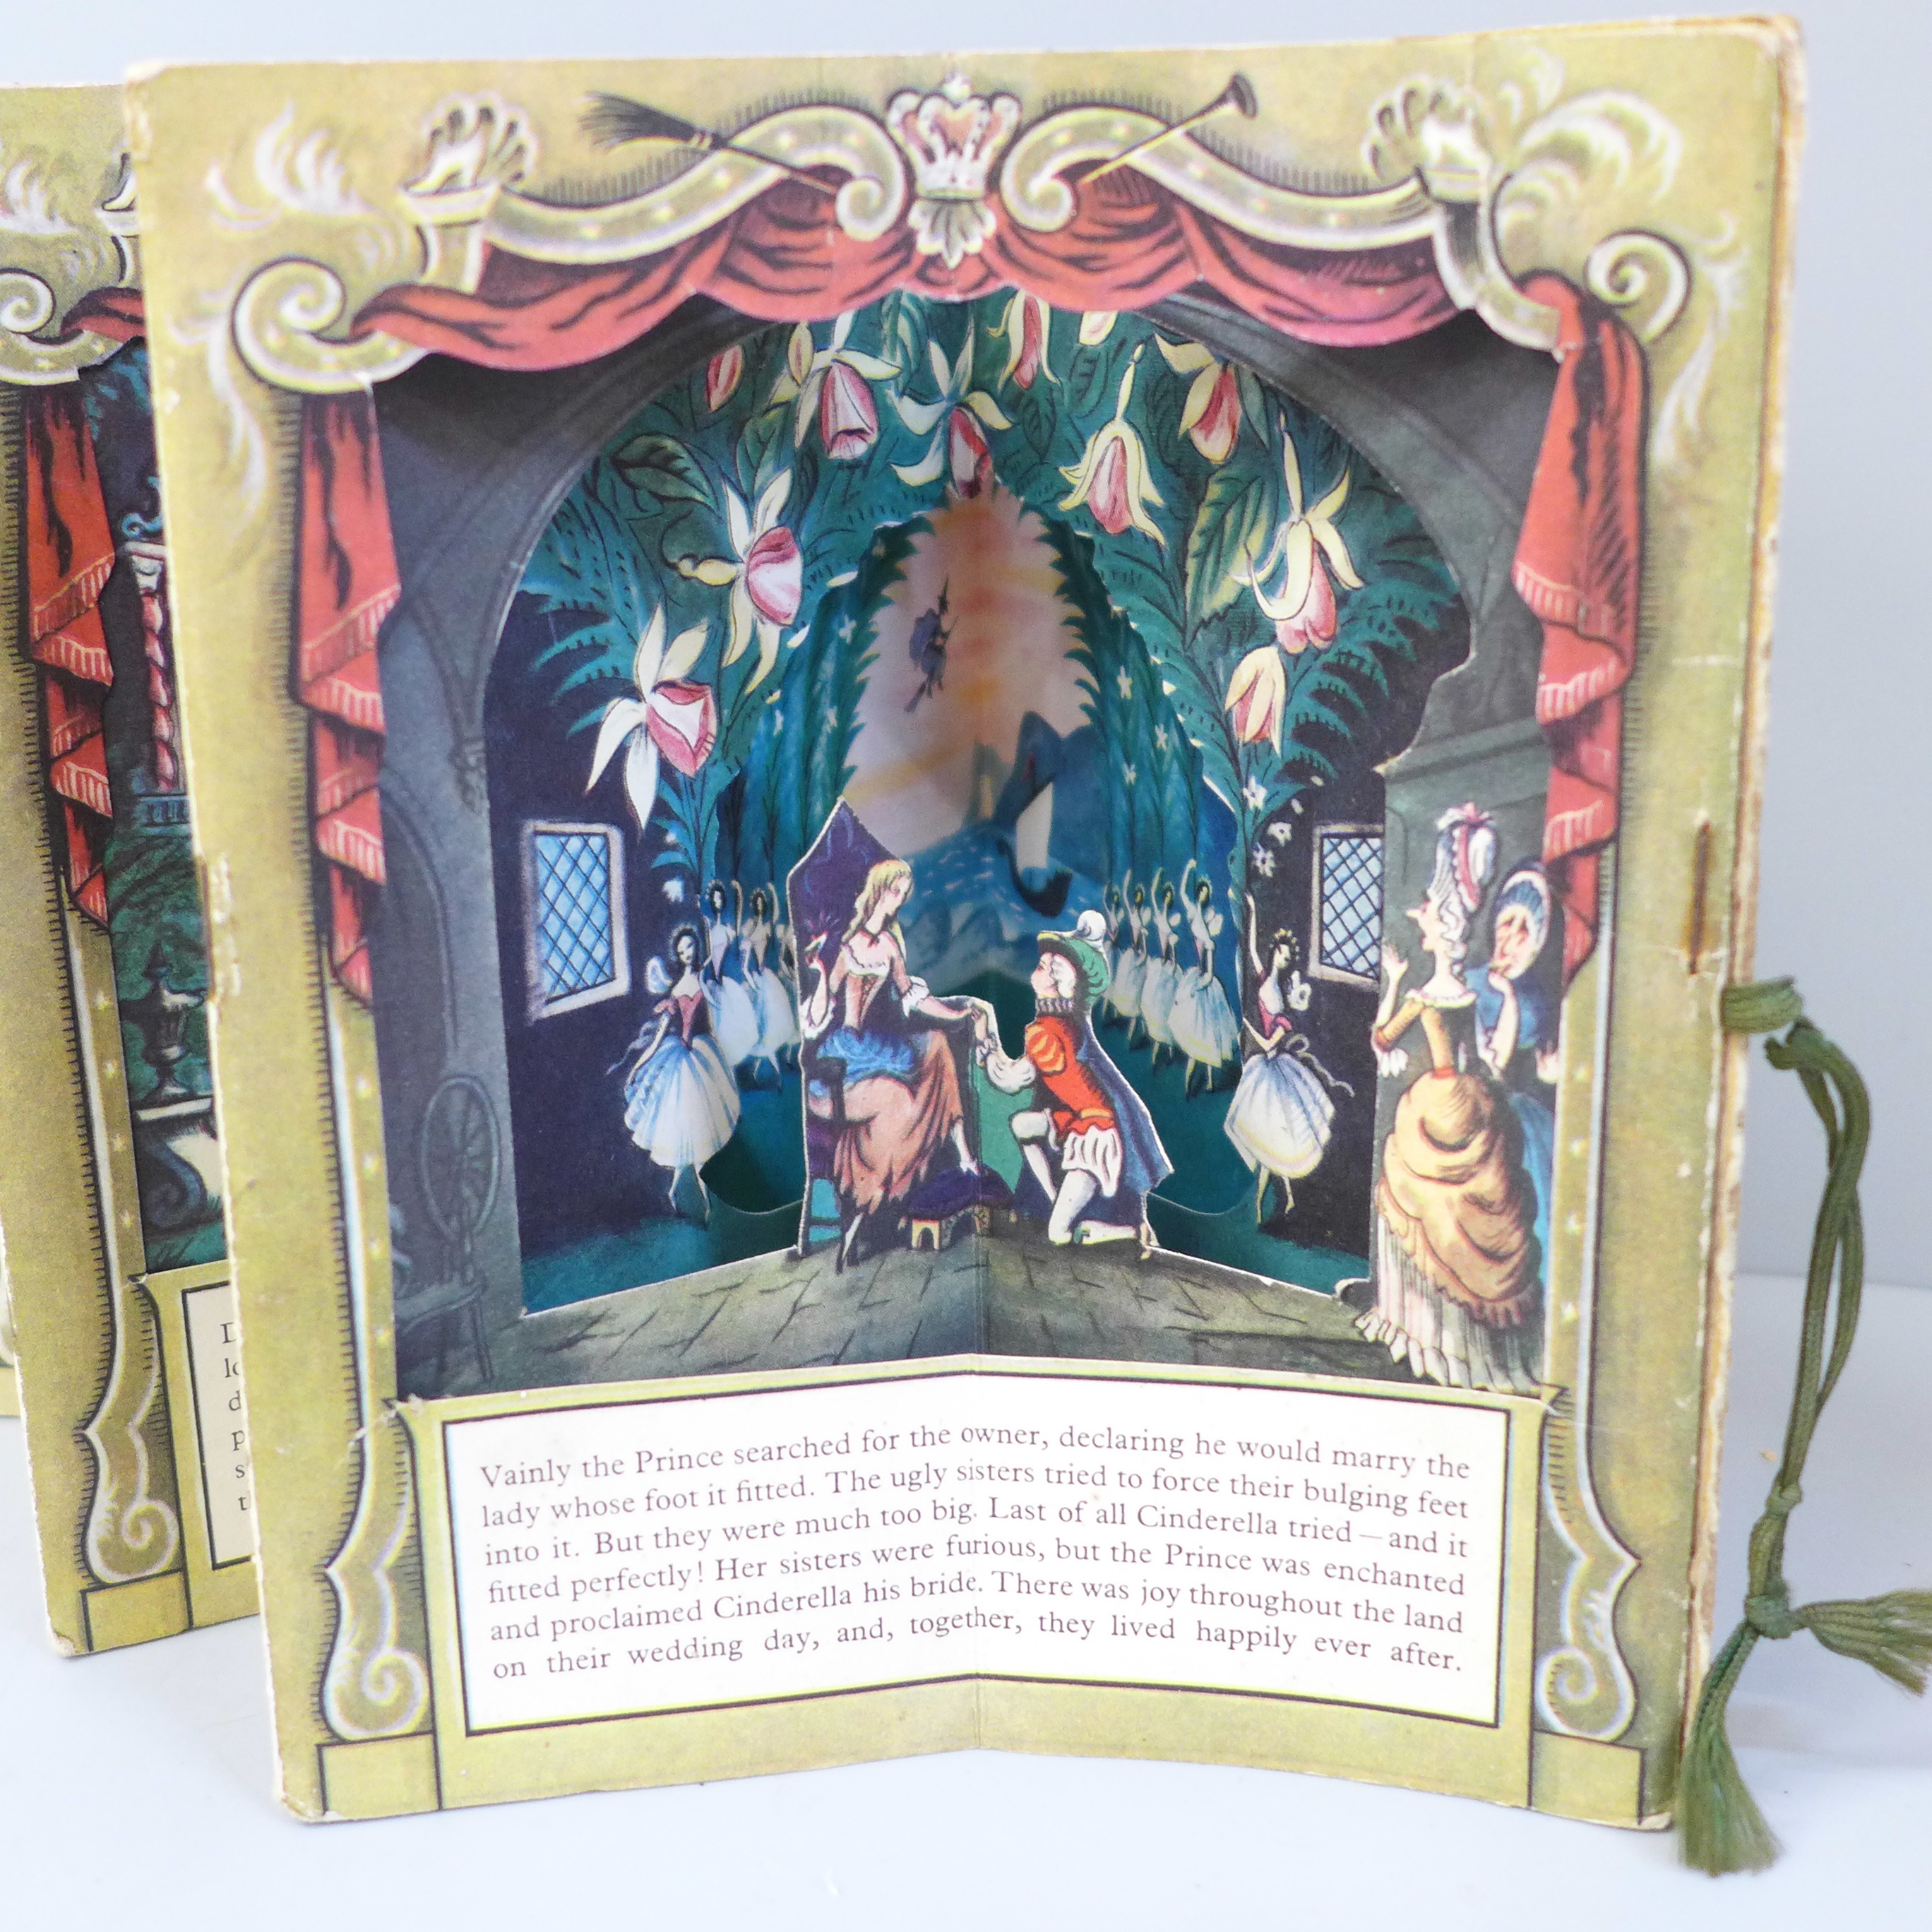 One volume, Cinderella, a Peepshow book, illustrated by Roland Pym - Image 5 of 8